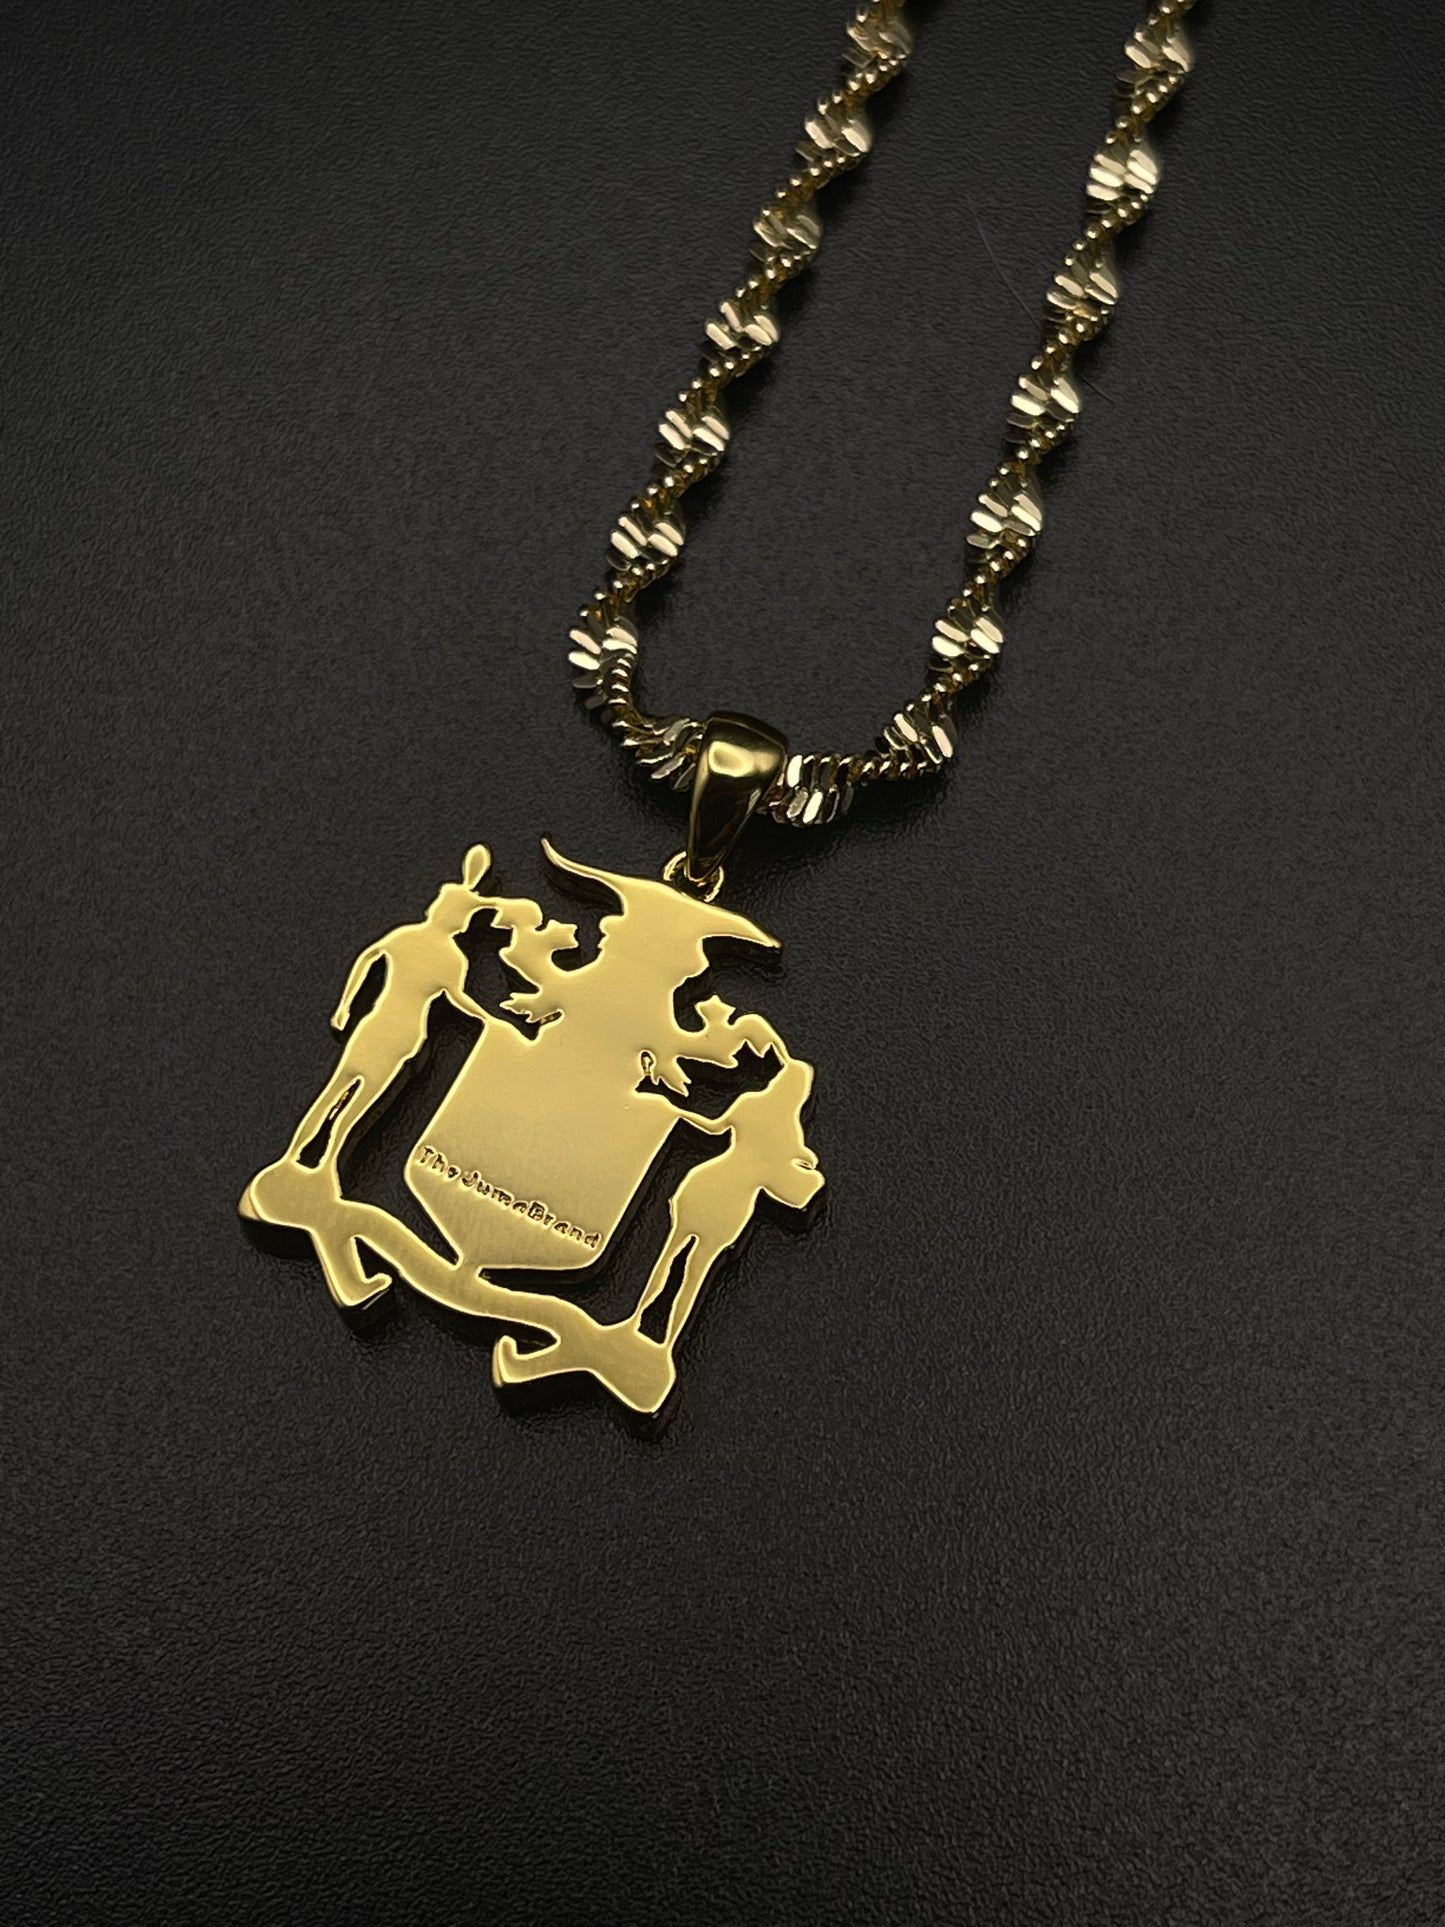 Jamaica Coat of Arms necklace